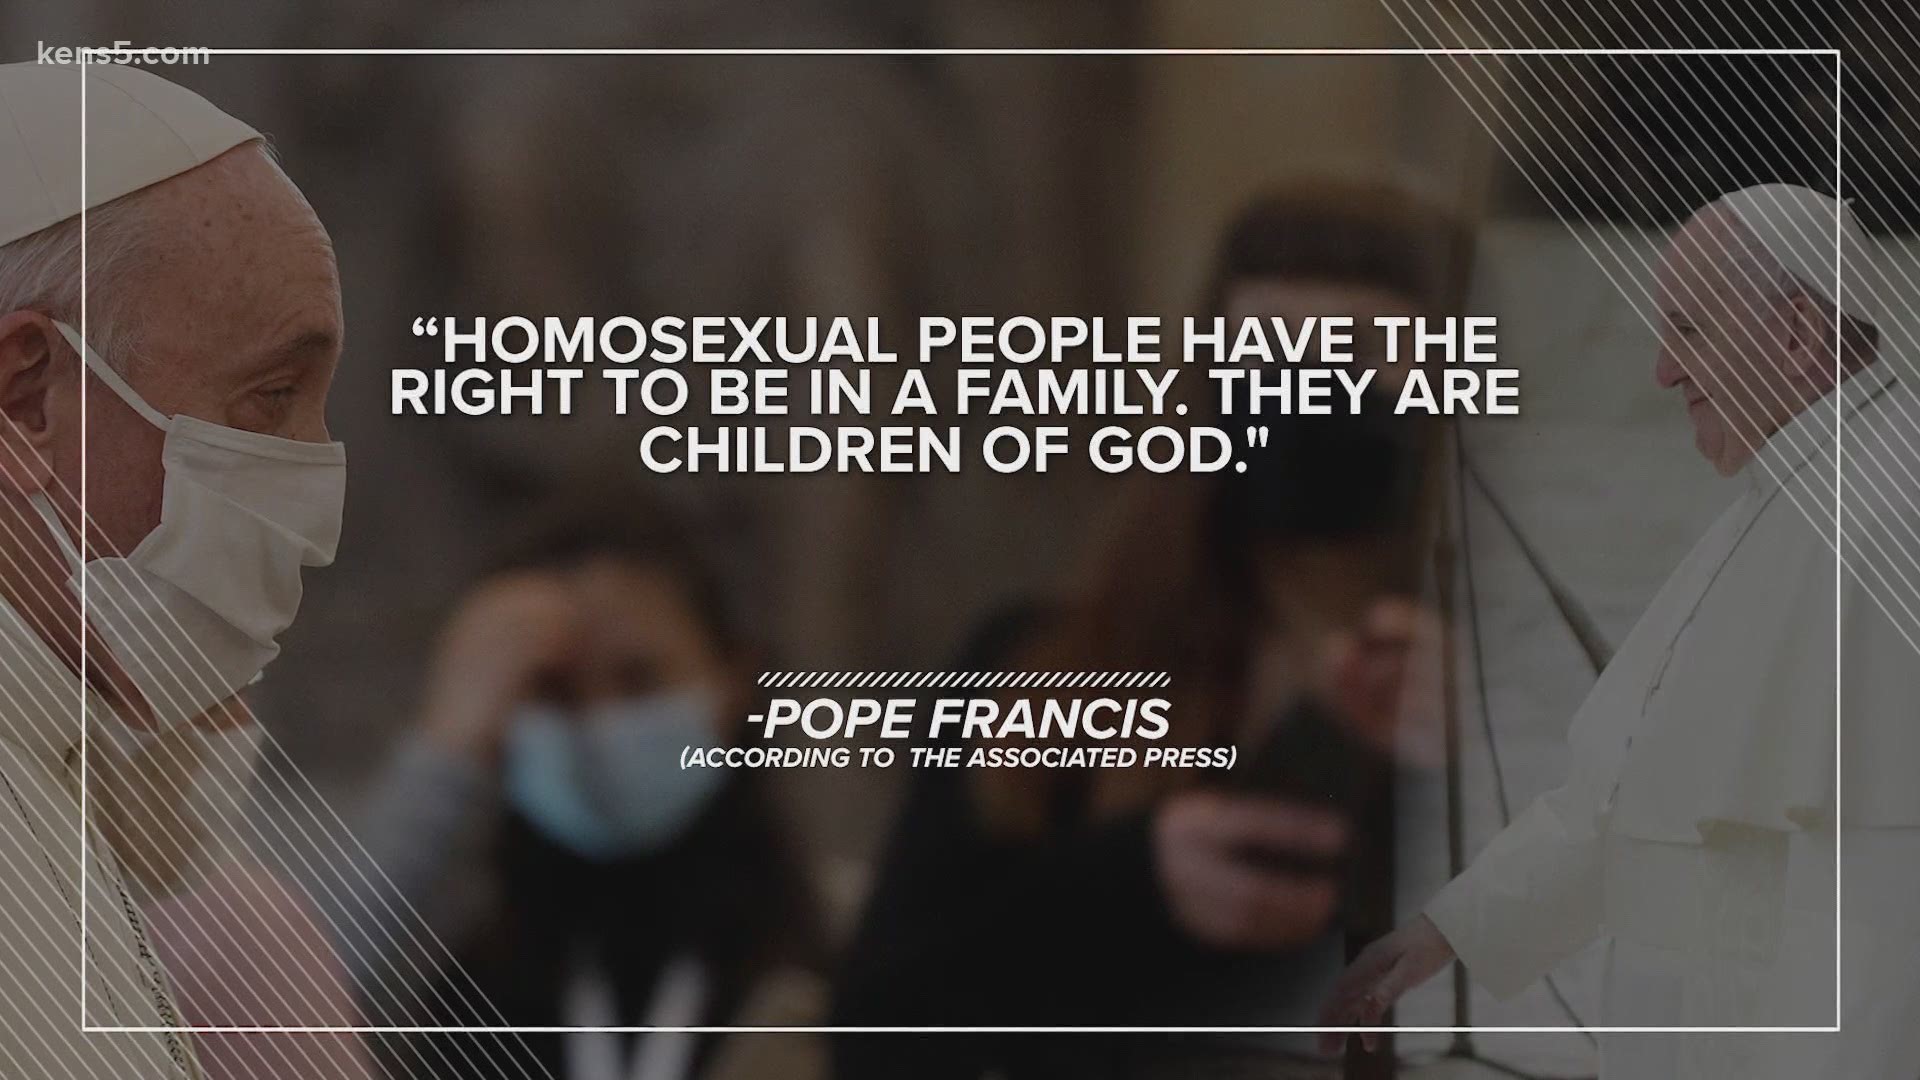 Pope Francis is making headlines around the world, announcing his support for same-sex civil unions.